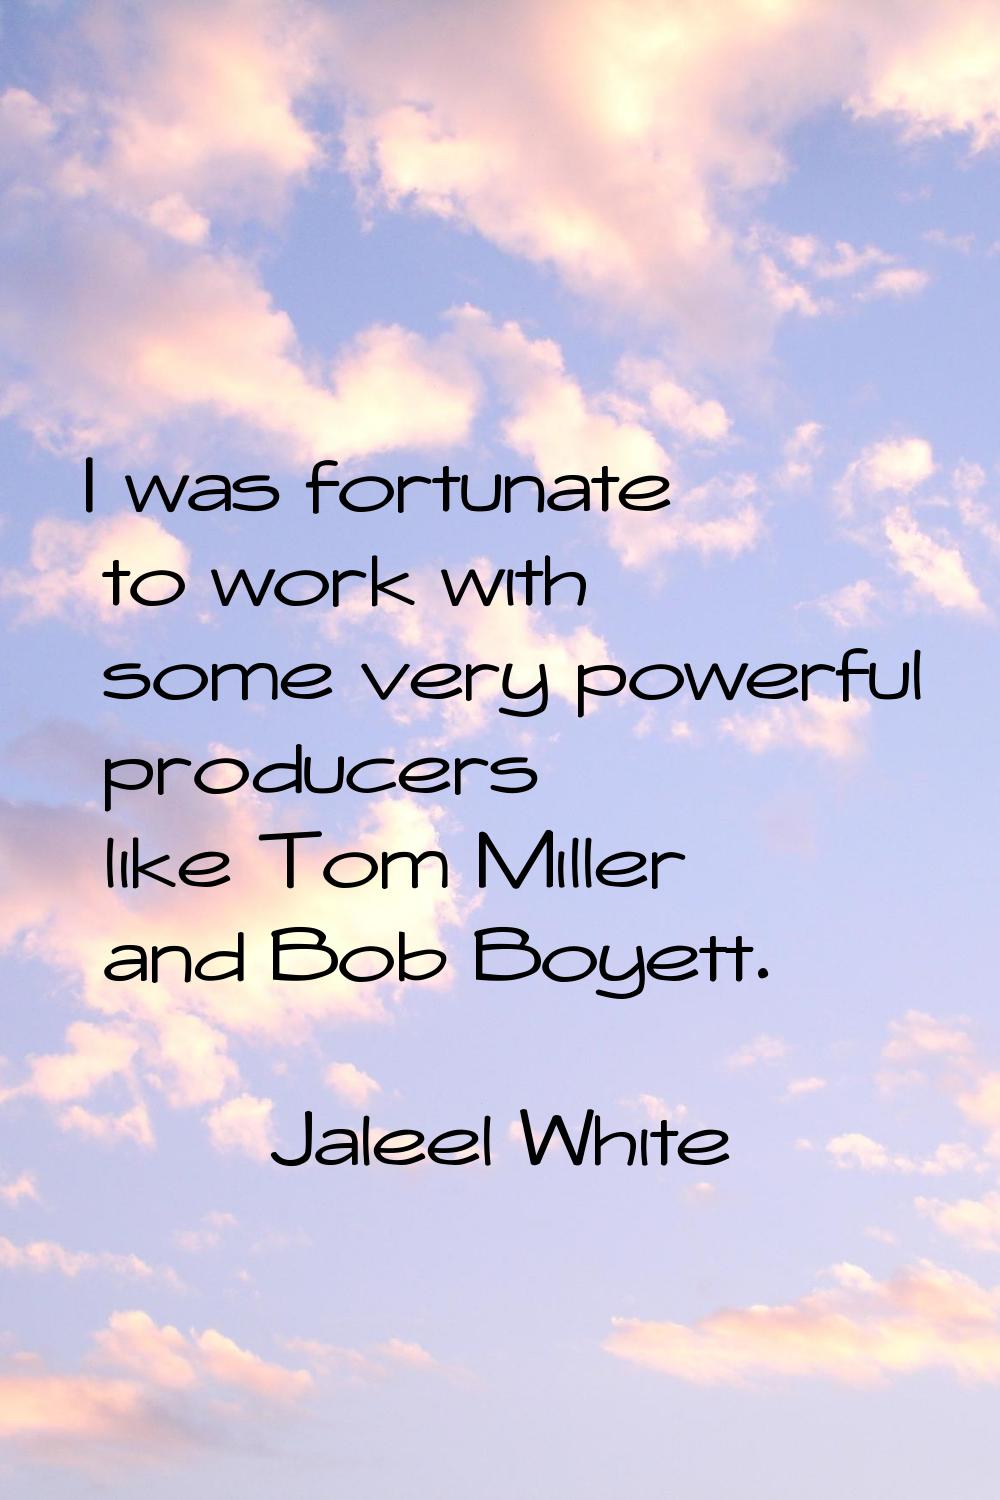 I was fortunate to work with some very powerful producers like Tom Miller and Bob Boyett.